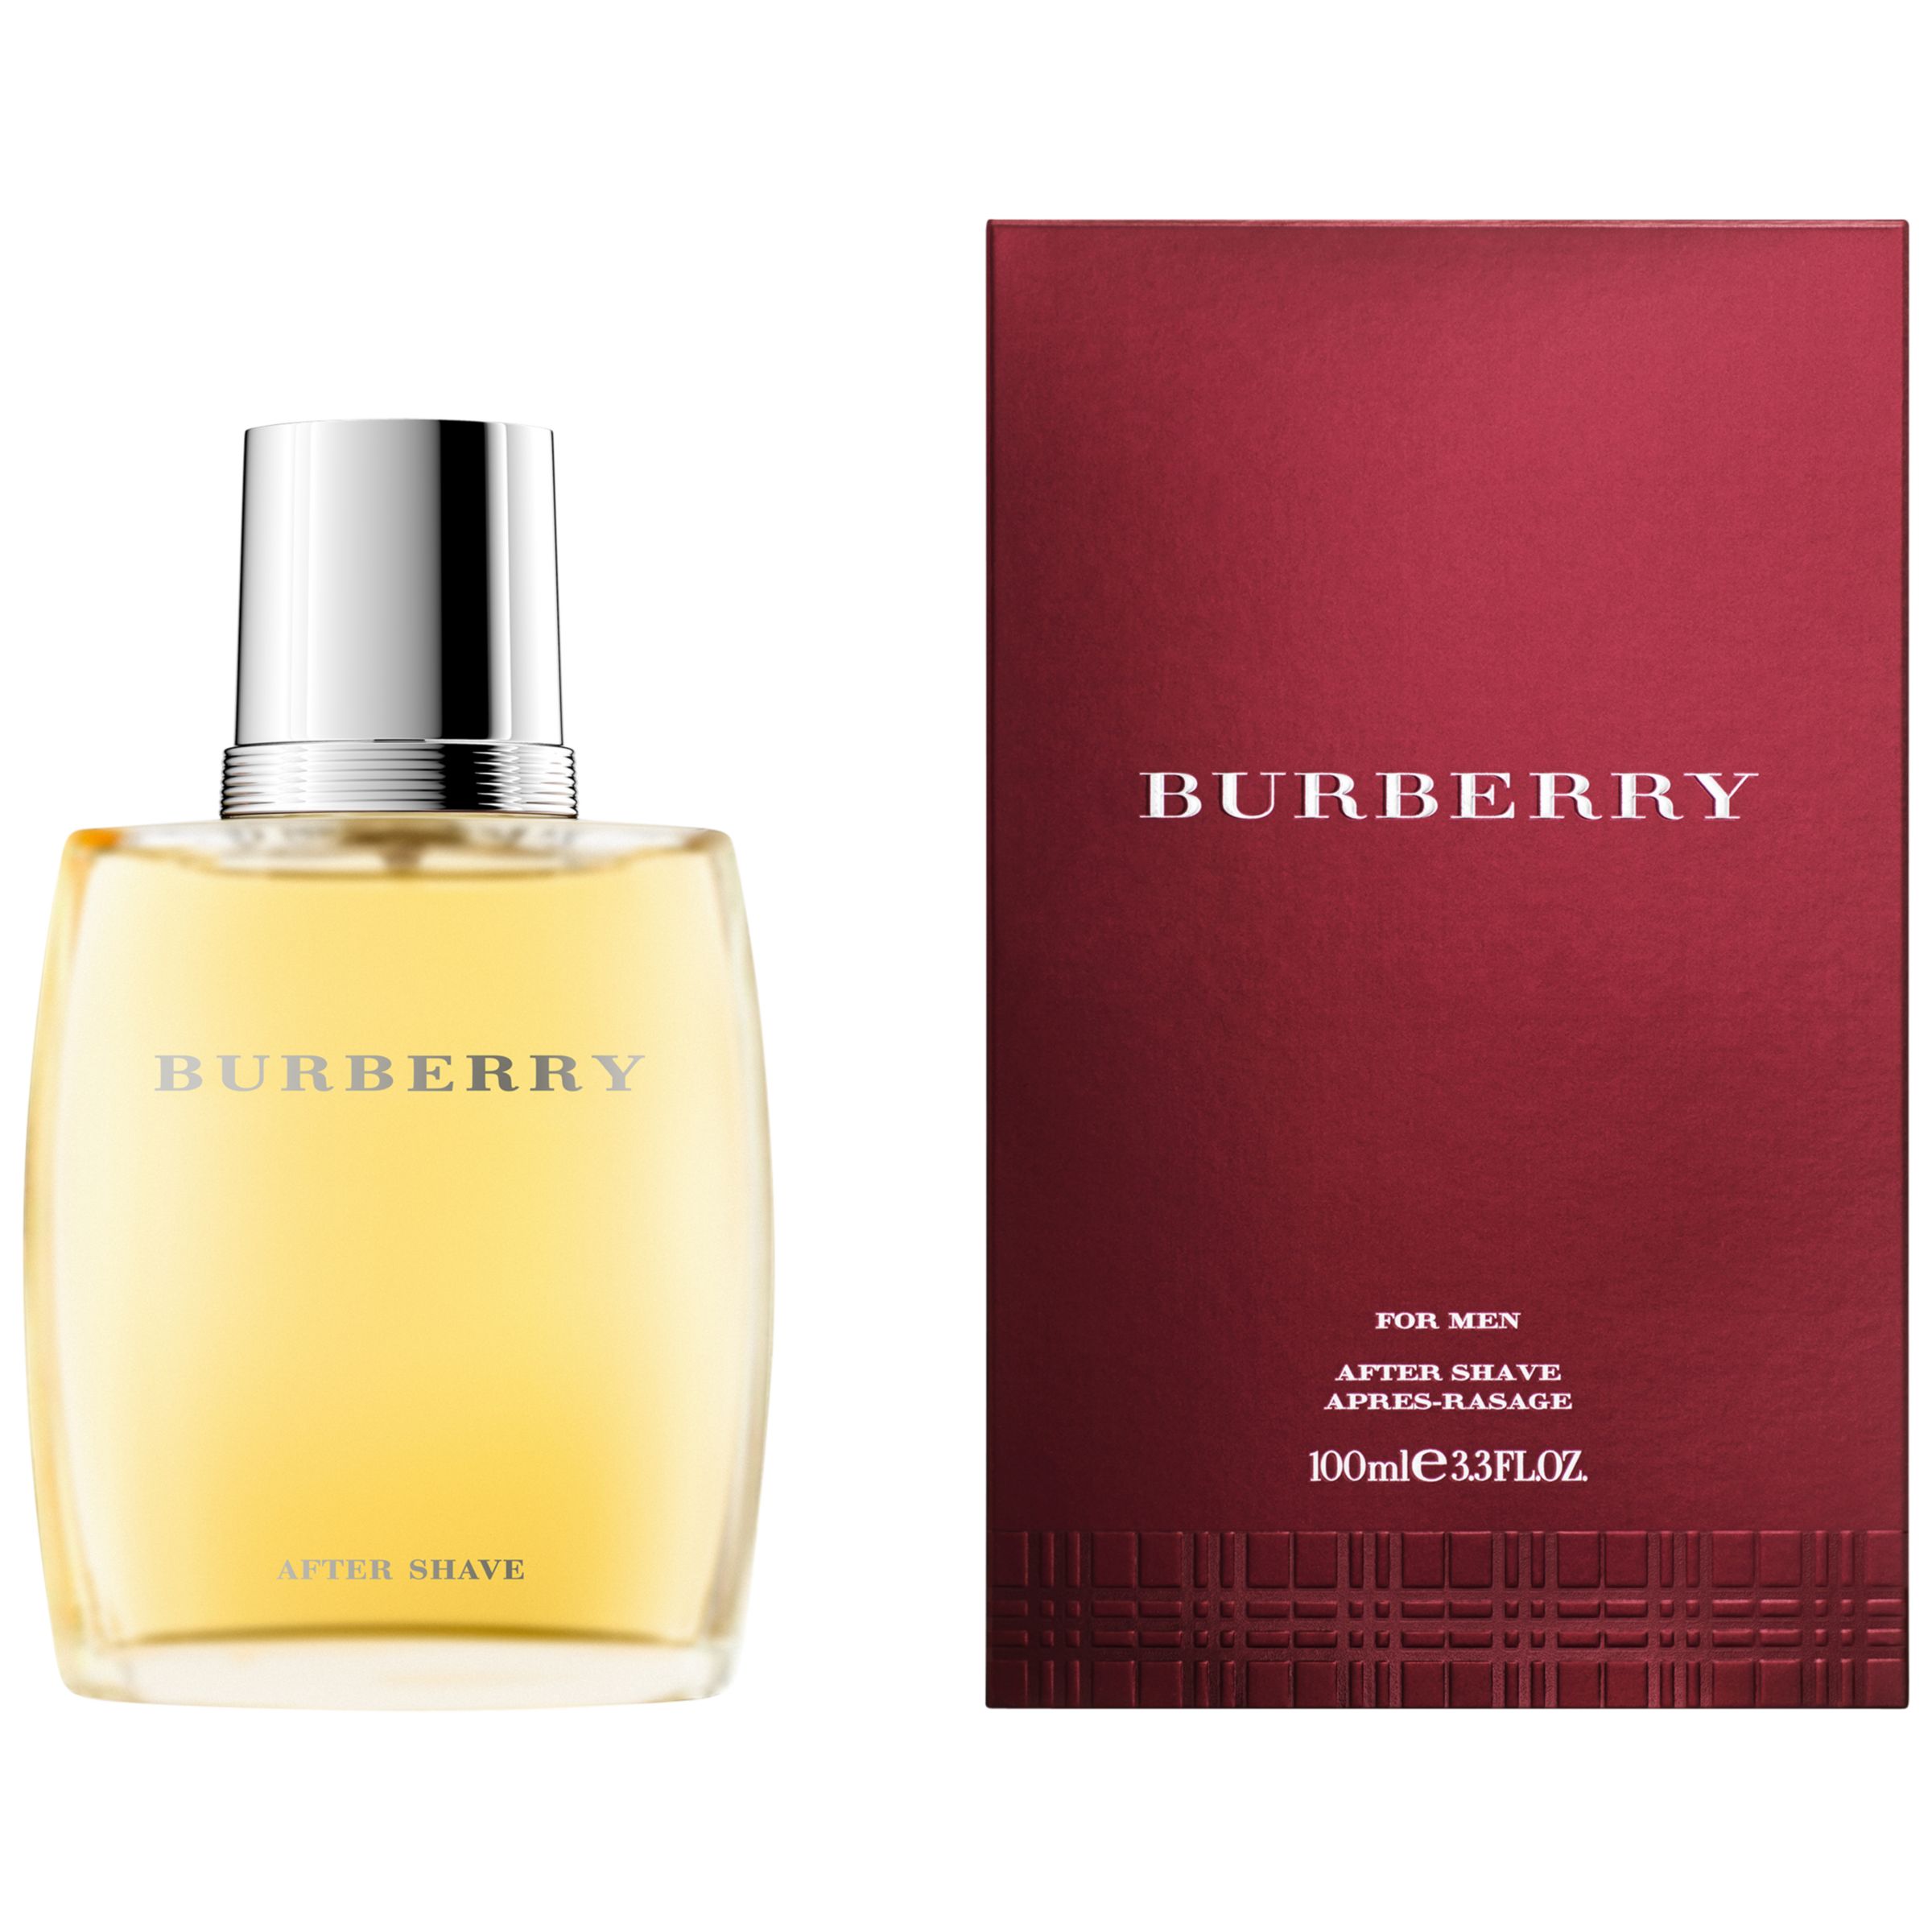 burberry london aftershave 100ml